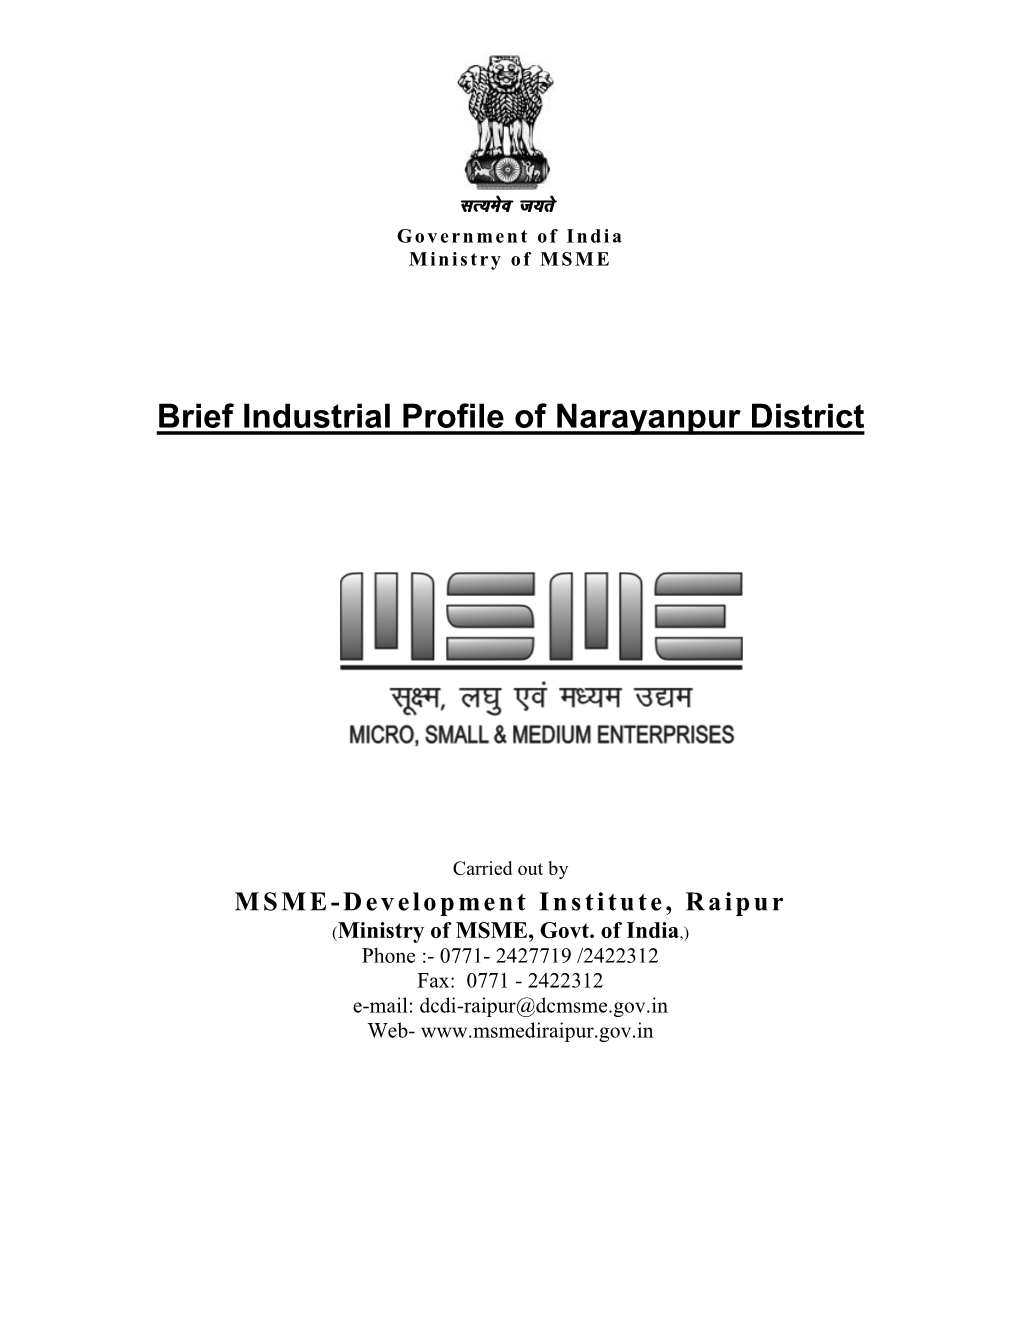 Brief Industrial Profile of Narayanpur District